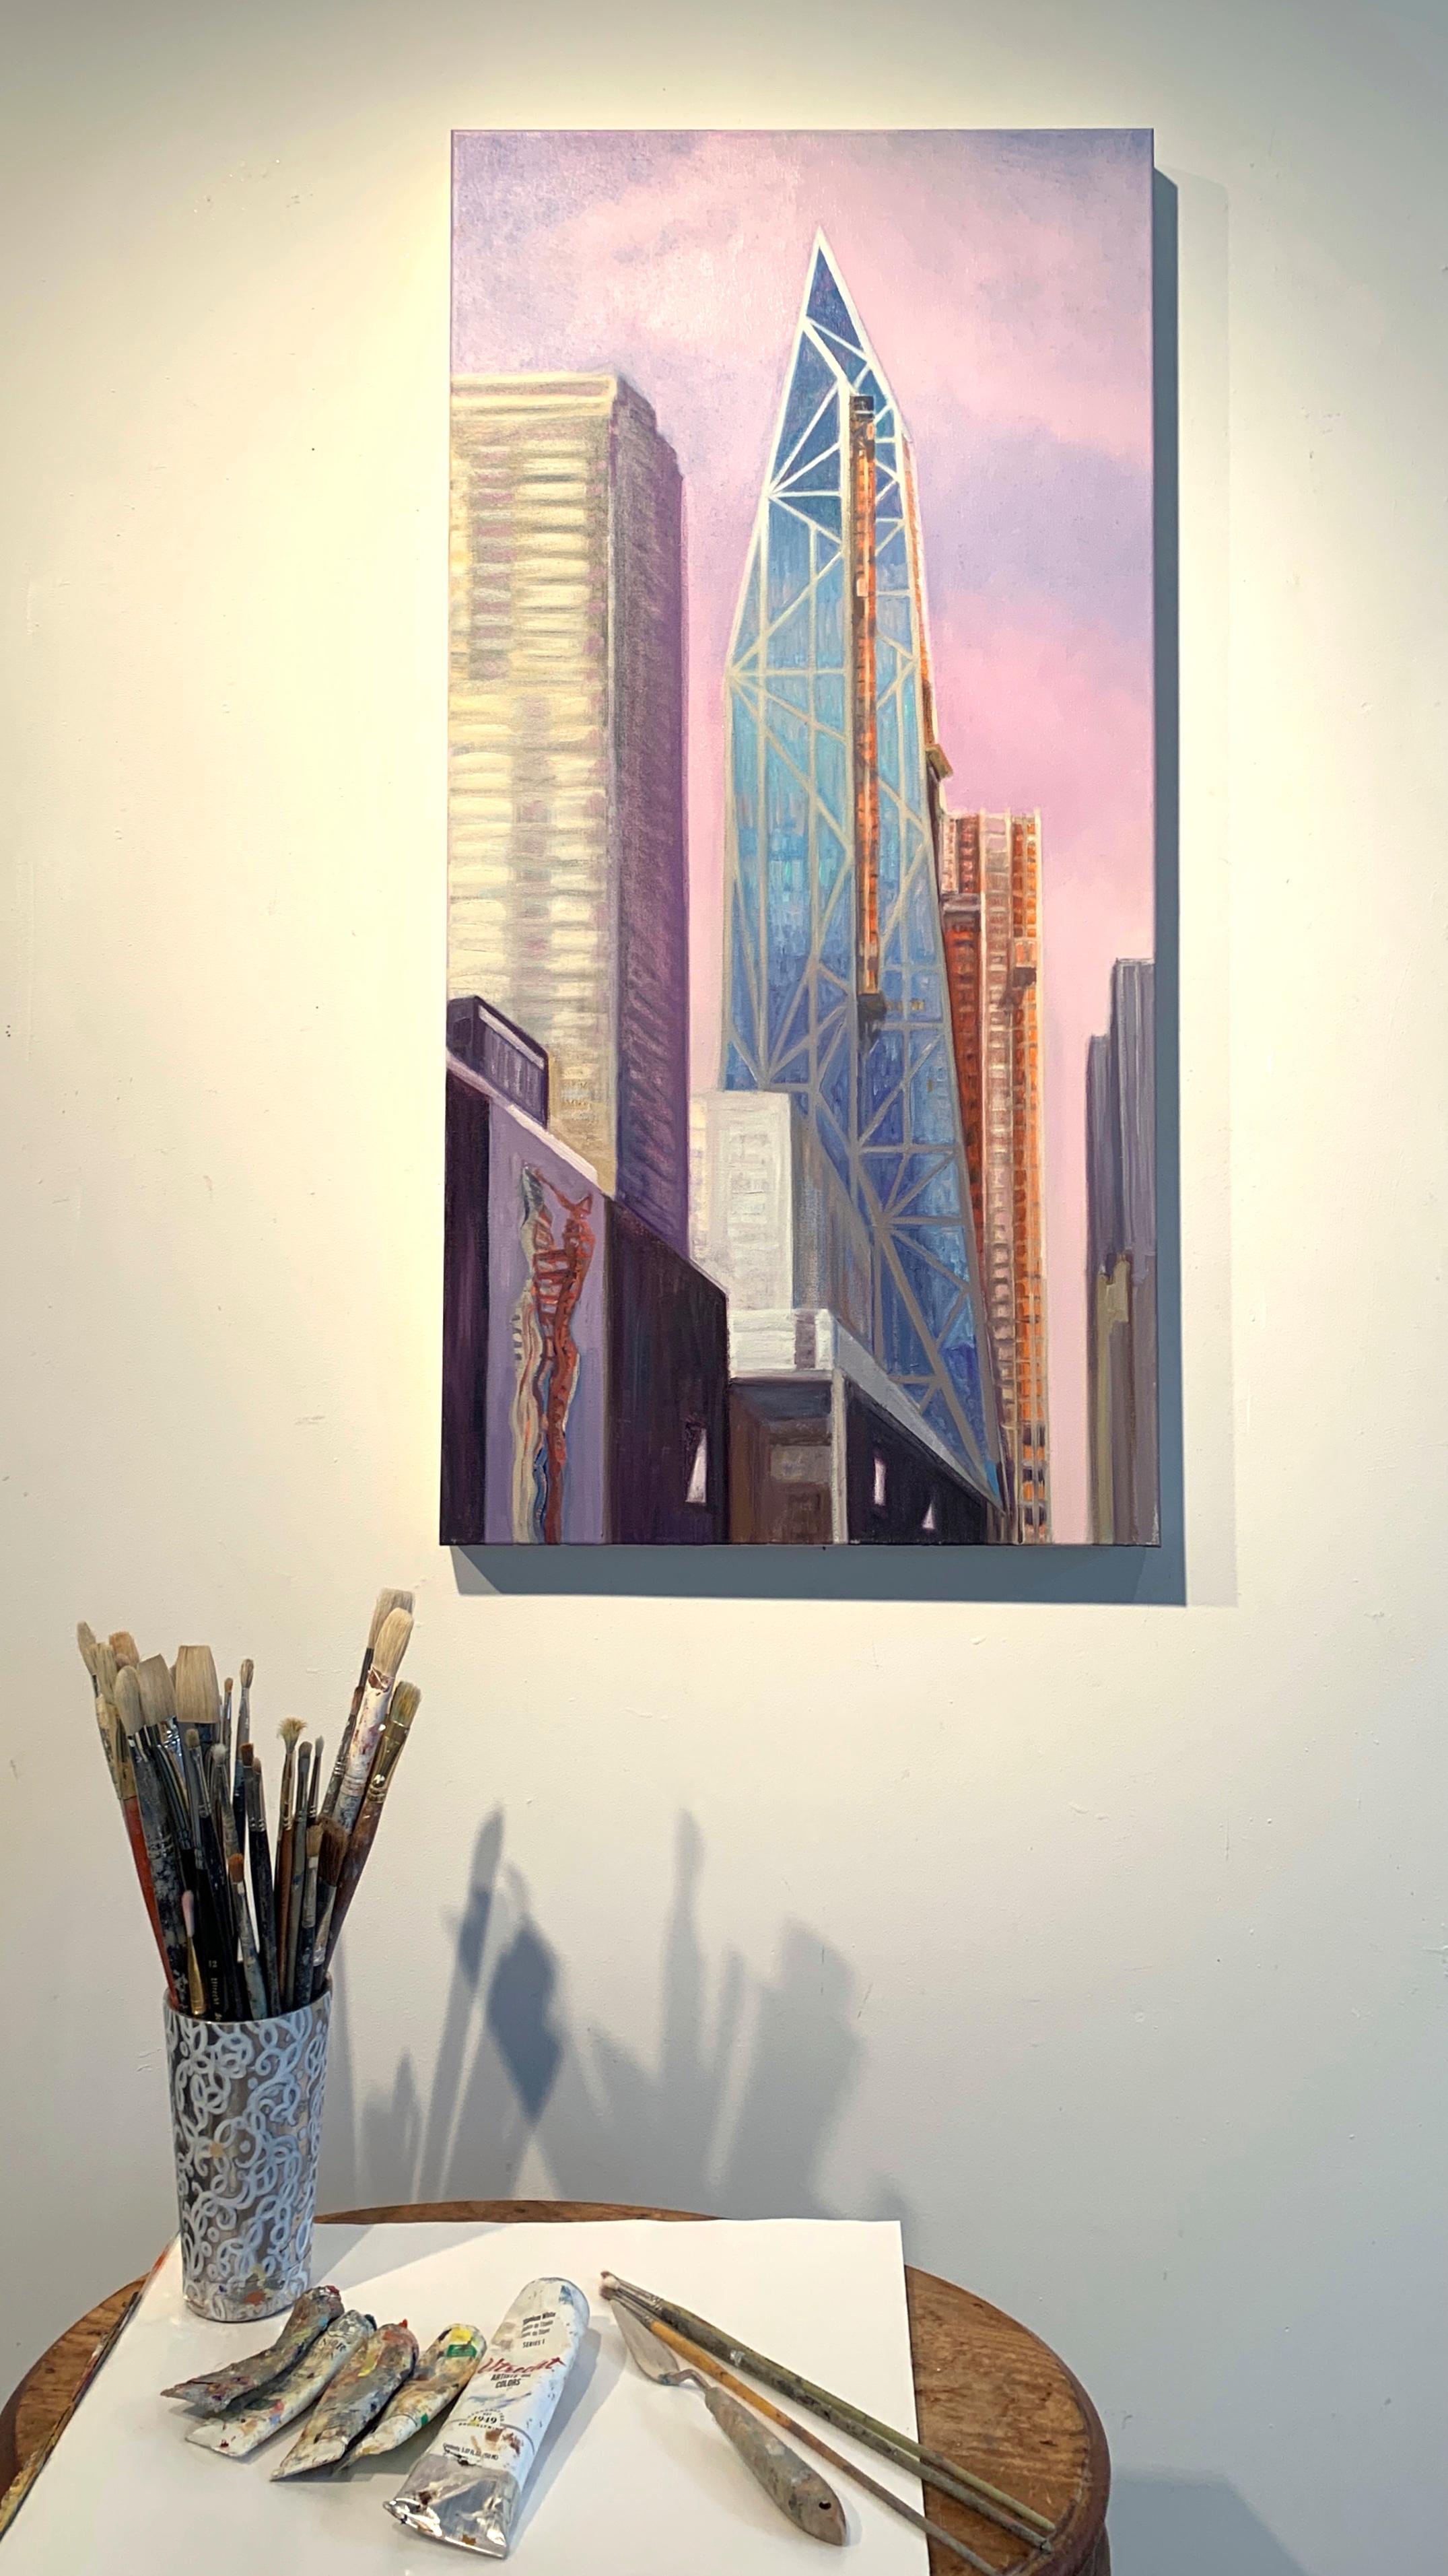 53 West 53rd Rising over MoMA 3, View from West 54th Street - Painting by Gwyneth Leech